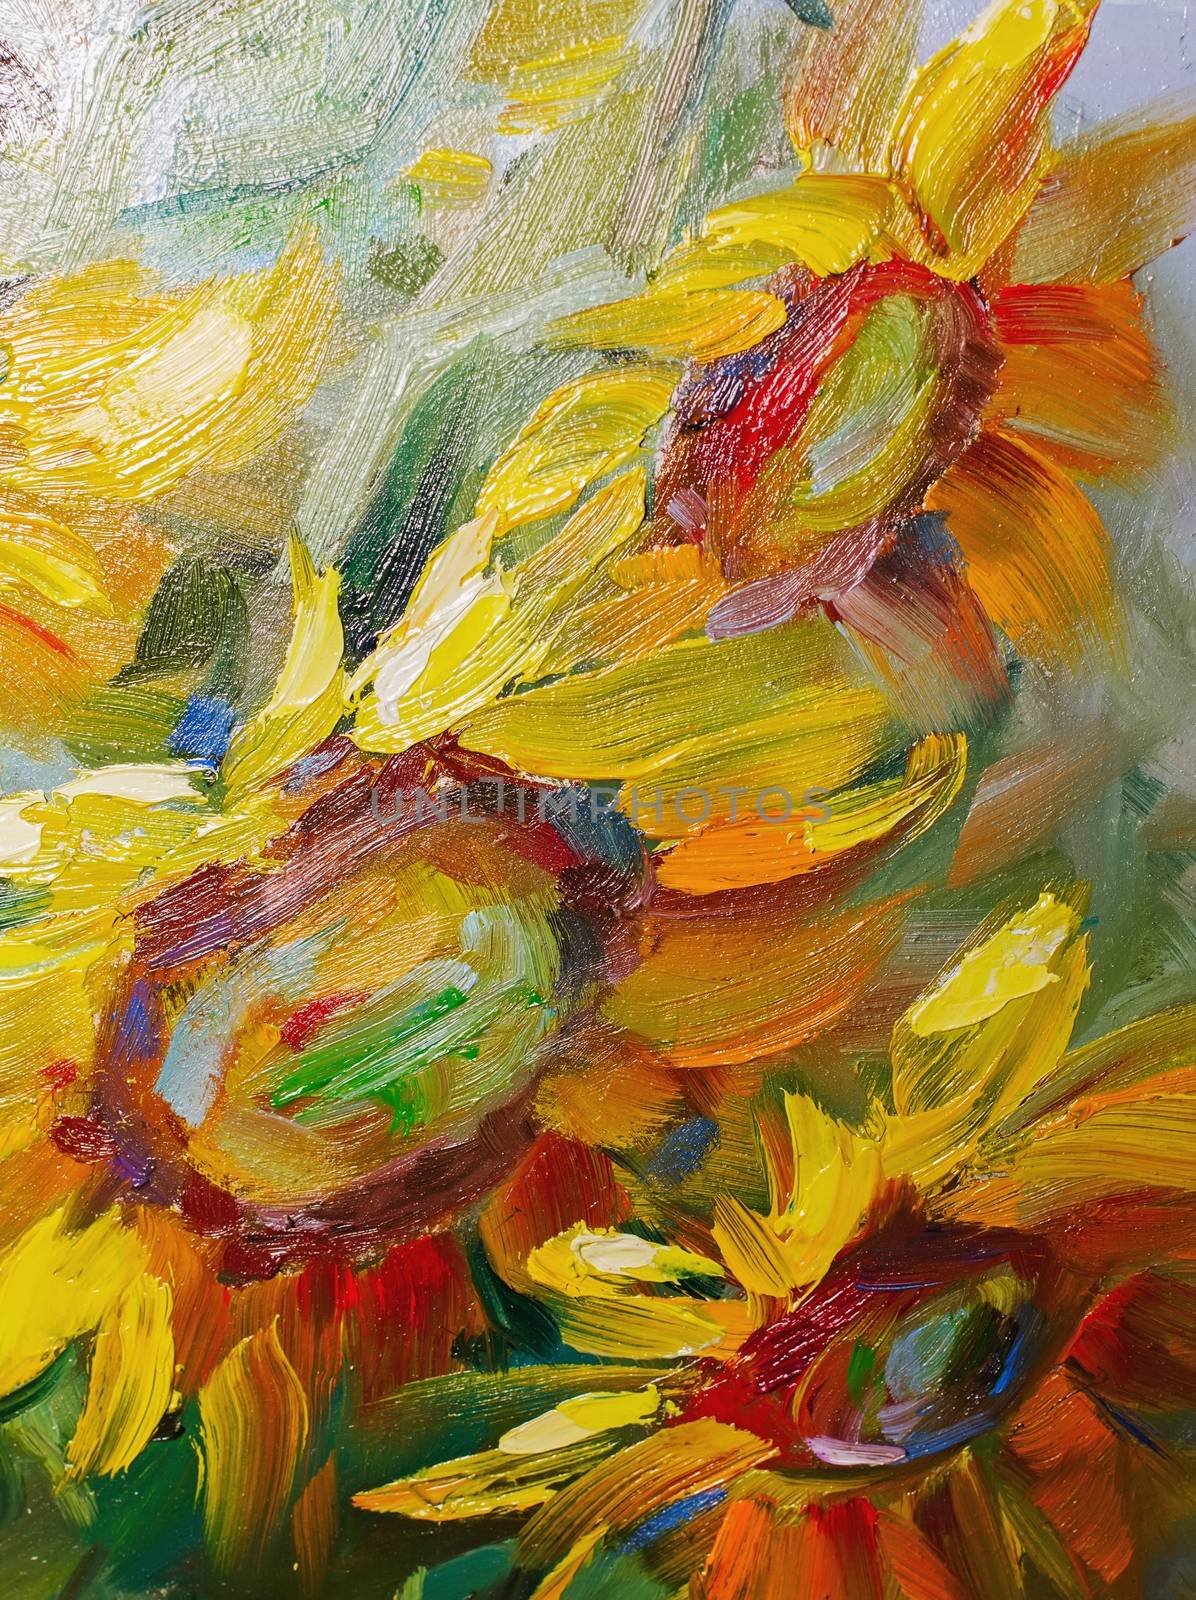 Texture oil painting, floTexture of oil paintings, flowers, painting fragment of painted color image, wallpaper and backgrounds, for backgrounds and textures floral pattern in oil on canvaswers, art, painted color image, paint, wallpaper and backgrounds, canvas, artist, impressionism, painting floral pattern